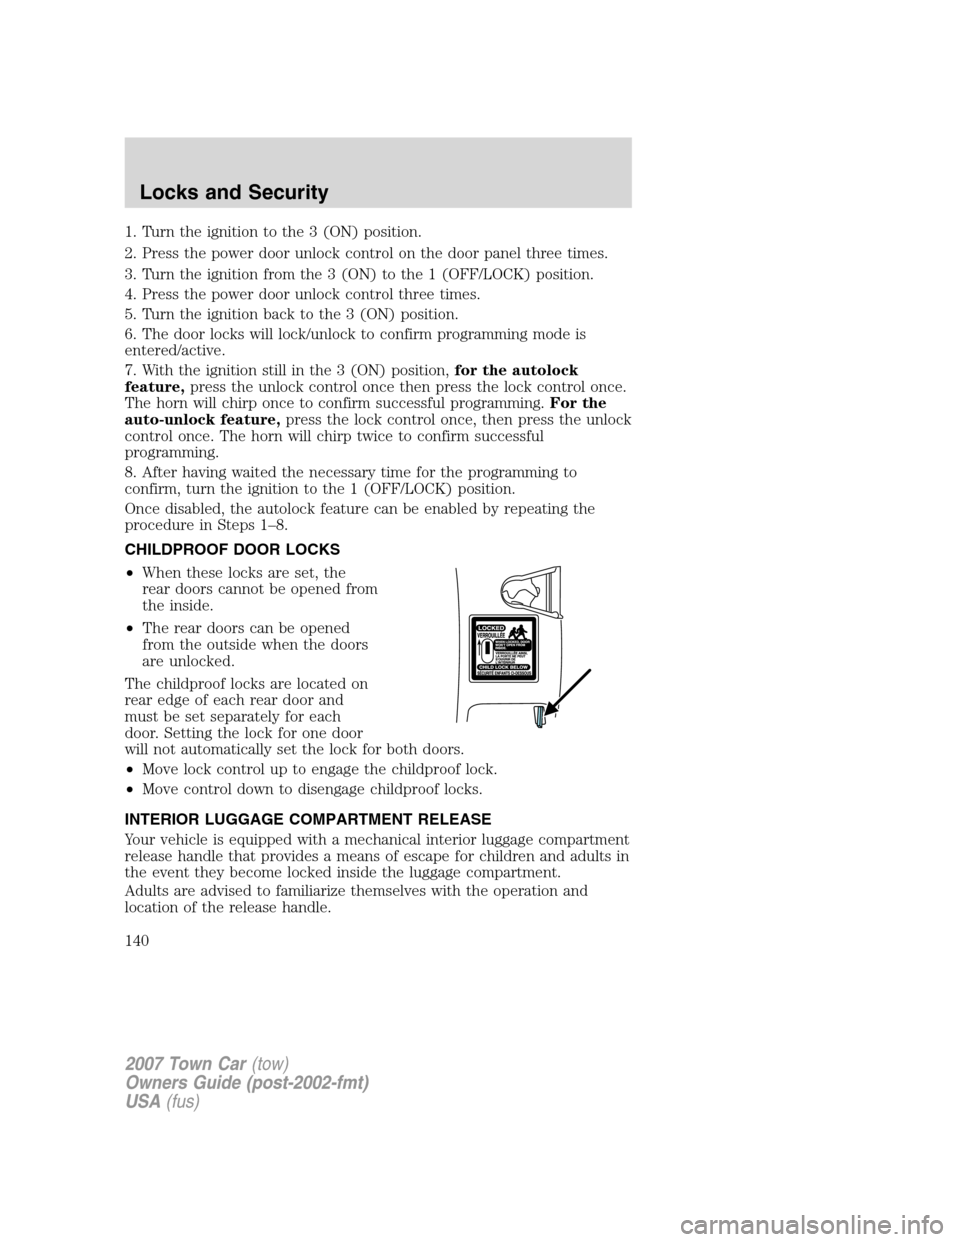 LINCOLN TOWN CAR 2007  Owners Manual 1. Turn the ignition to the 3 (ON) position.
2. Press the power door unlock control on the door panel three times.
3. Turn the ignition from the 3 (ON) to the 1 (OFF/LOCK) position.
4. Press the power